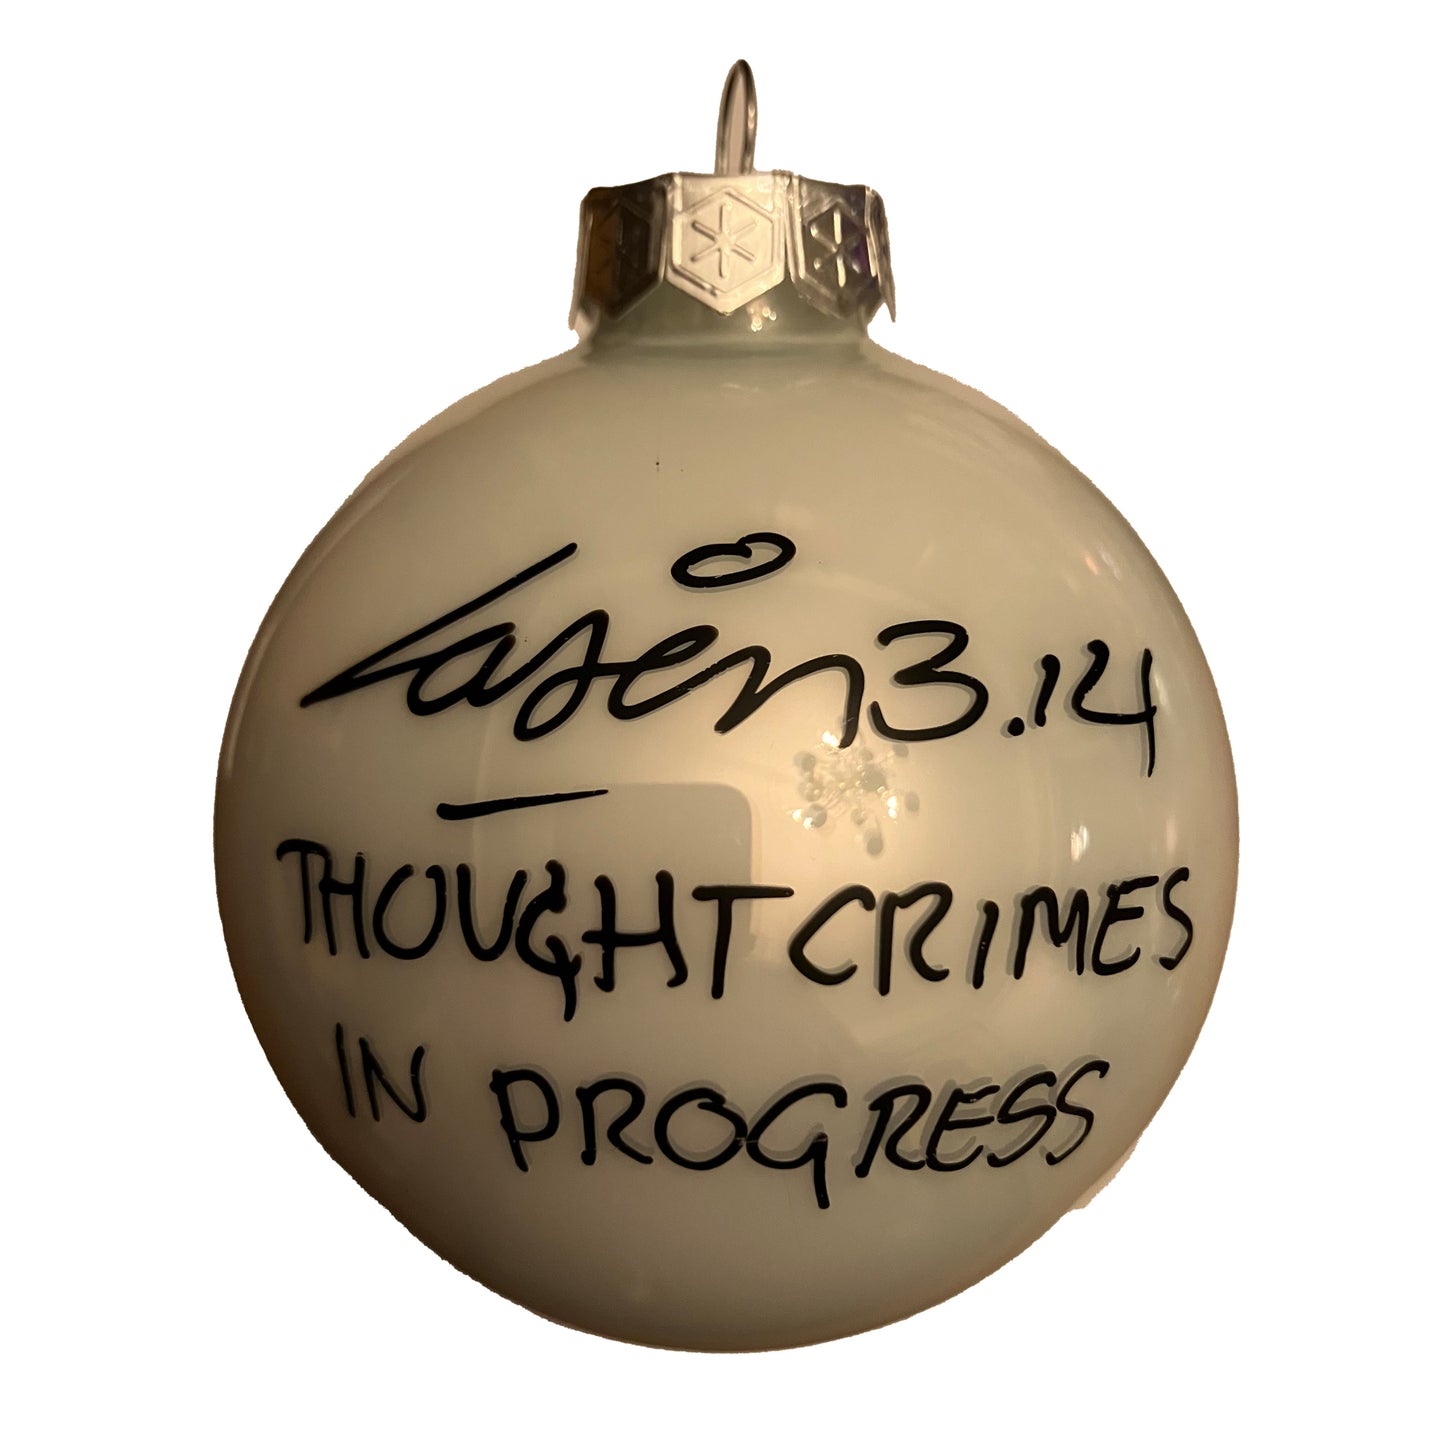 Thoughtcrimes In Progress - White Glossy Glass | Laser 3.14 x Famous Amsterdam Christmas Ball Ornament